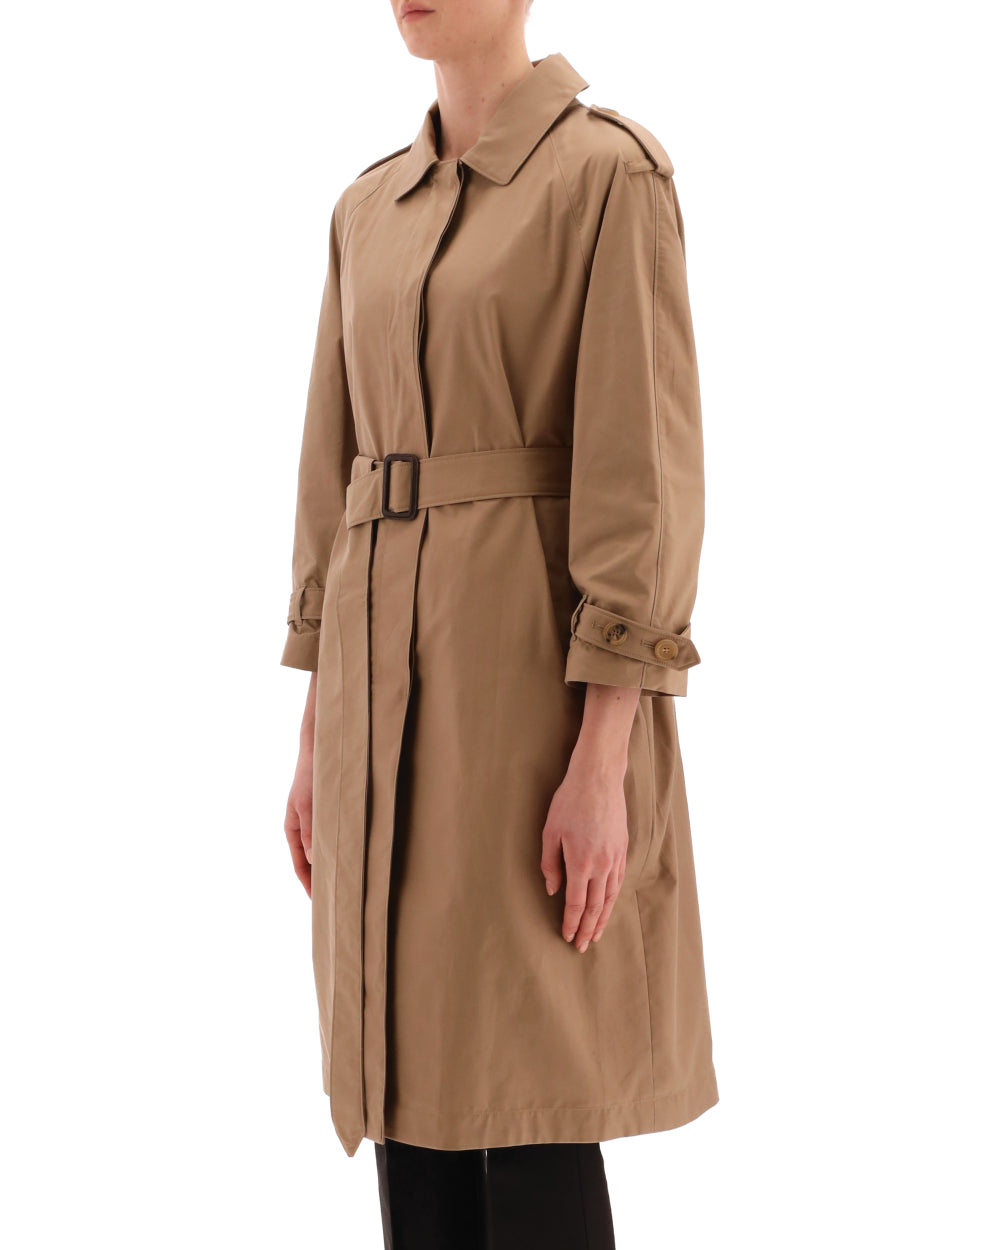 TRENCH | RTRENCH 001